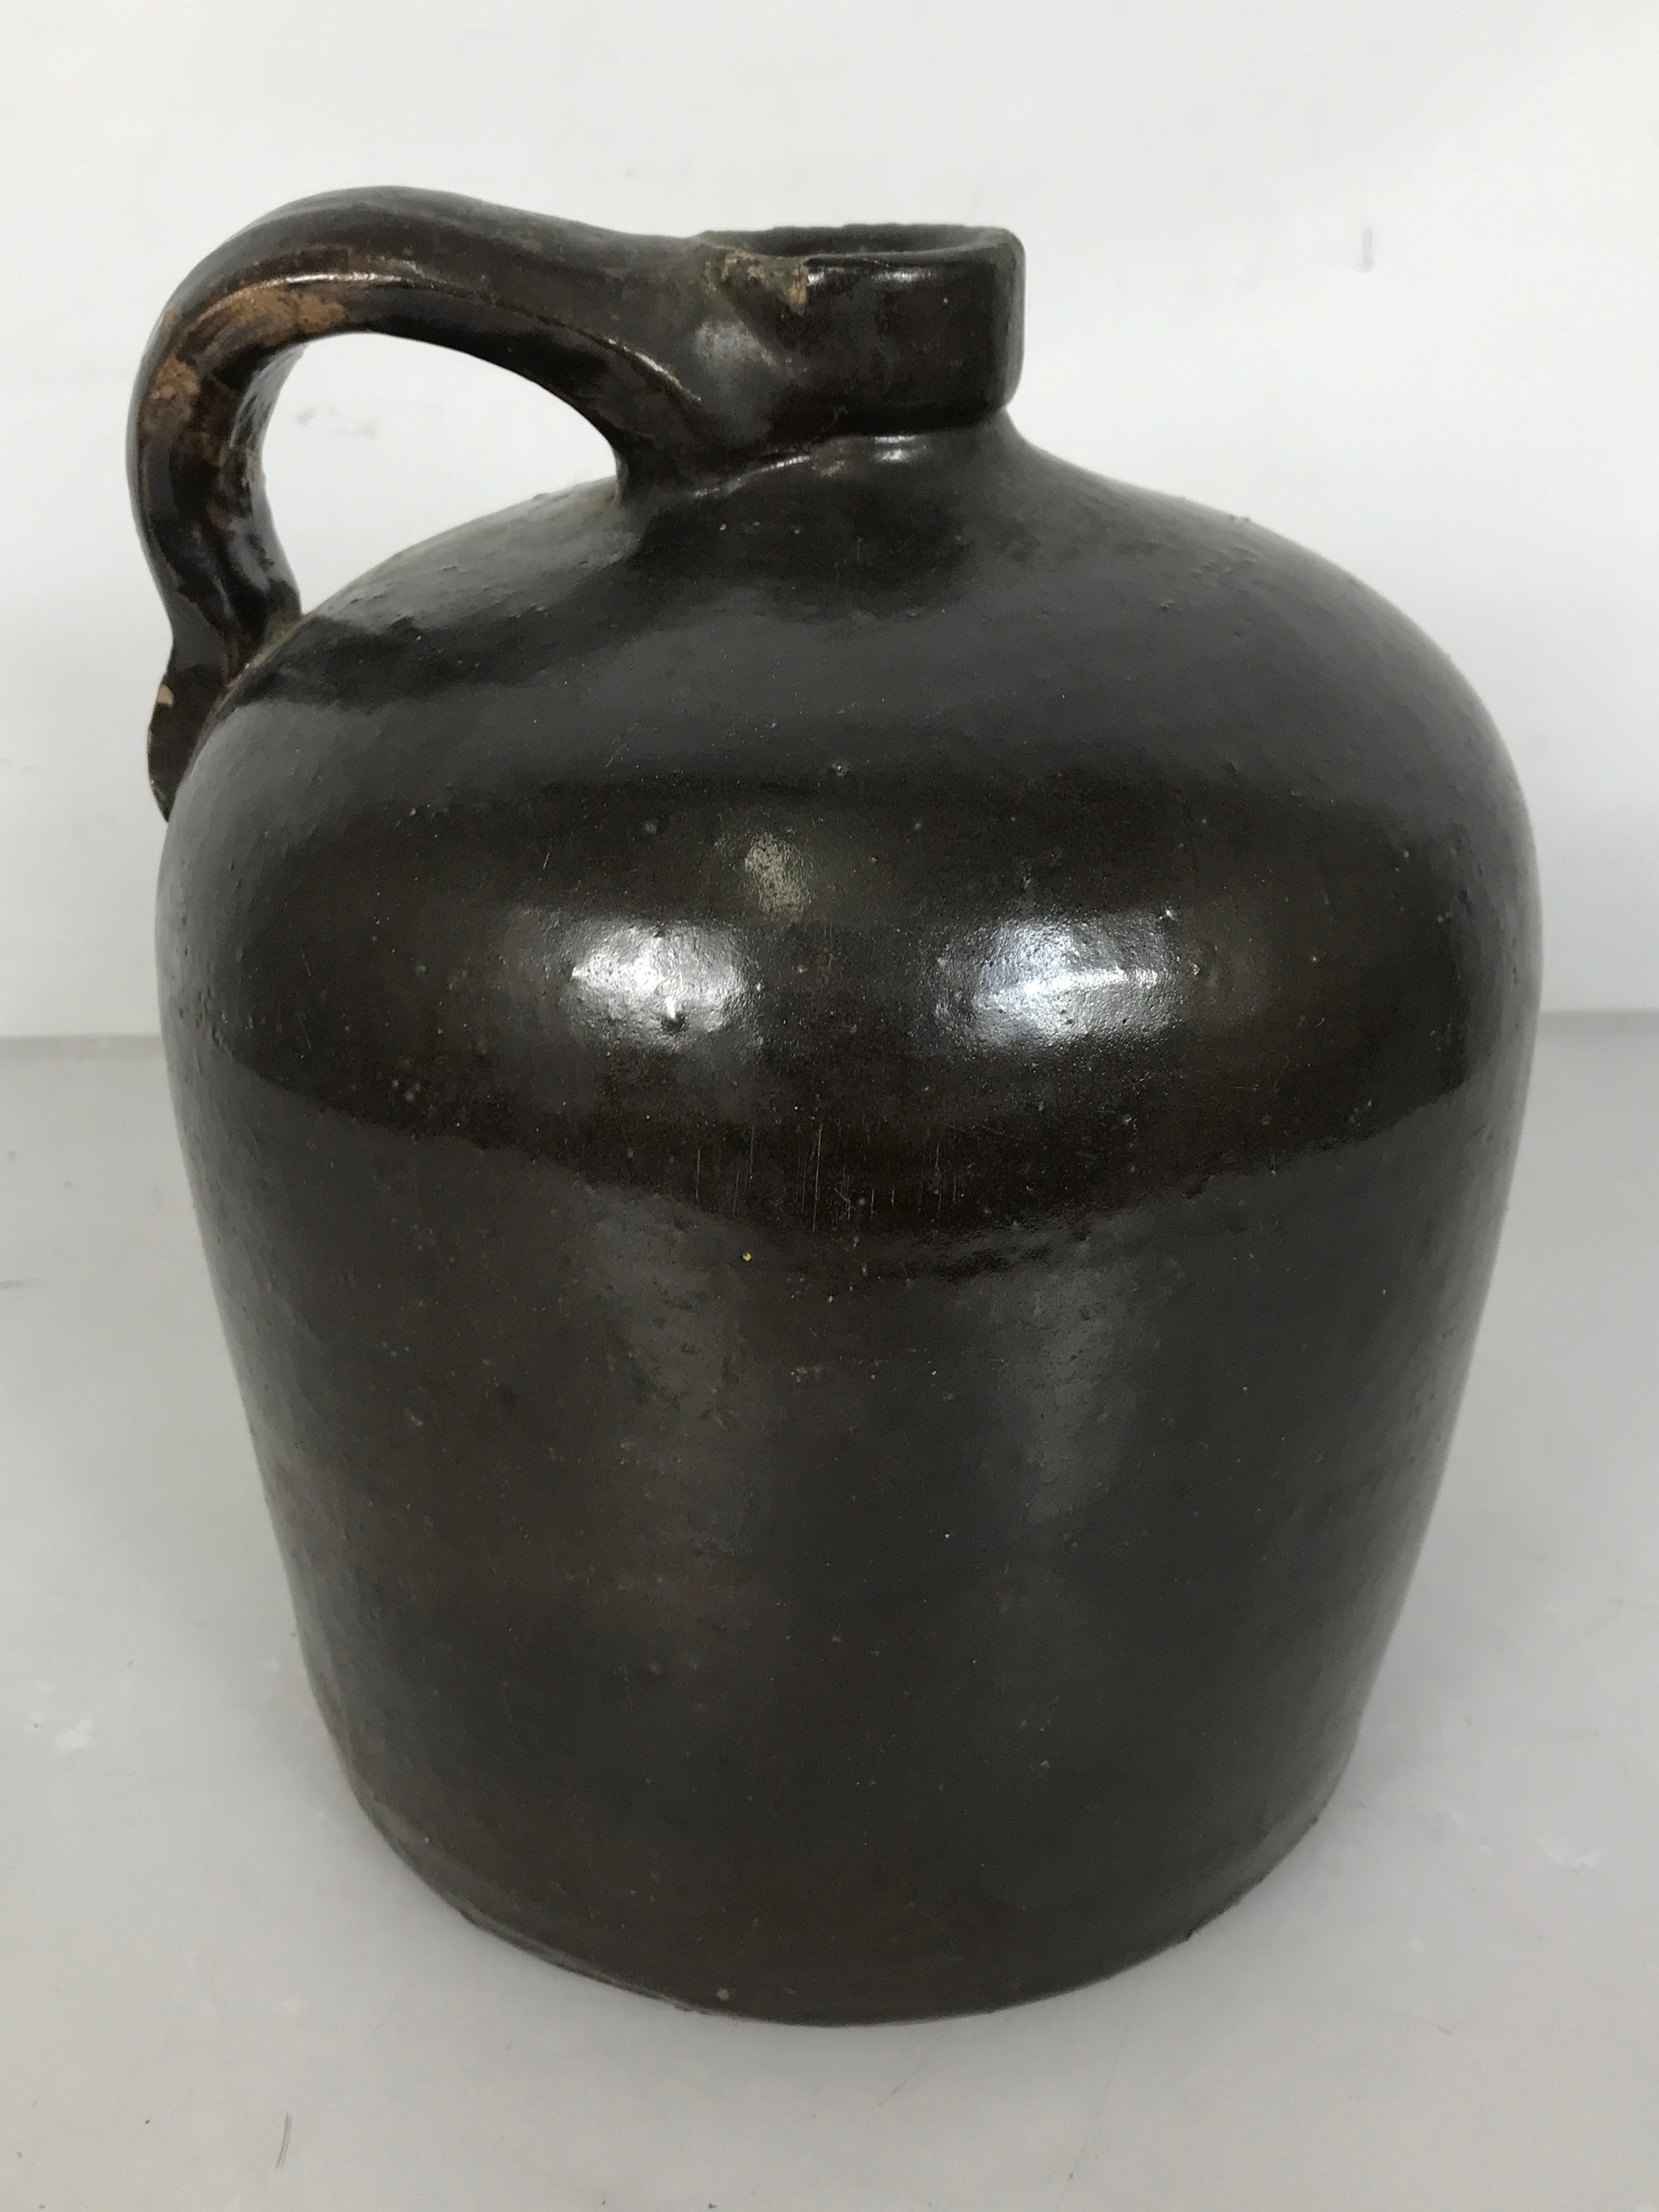 Antique 1 Gallon Brown Stoneware Pottery Whiskey or Cider Jug